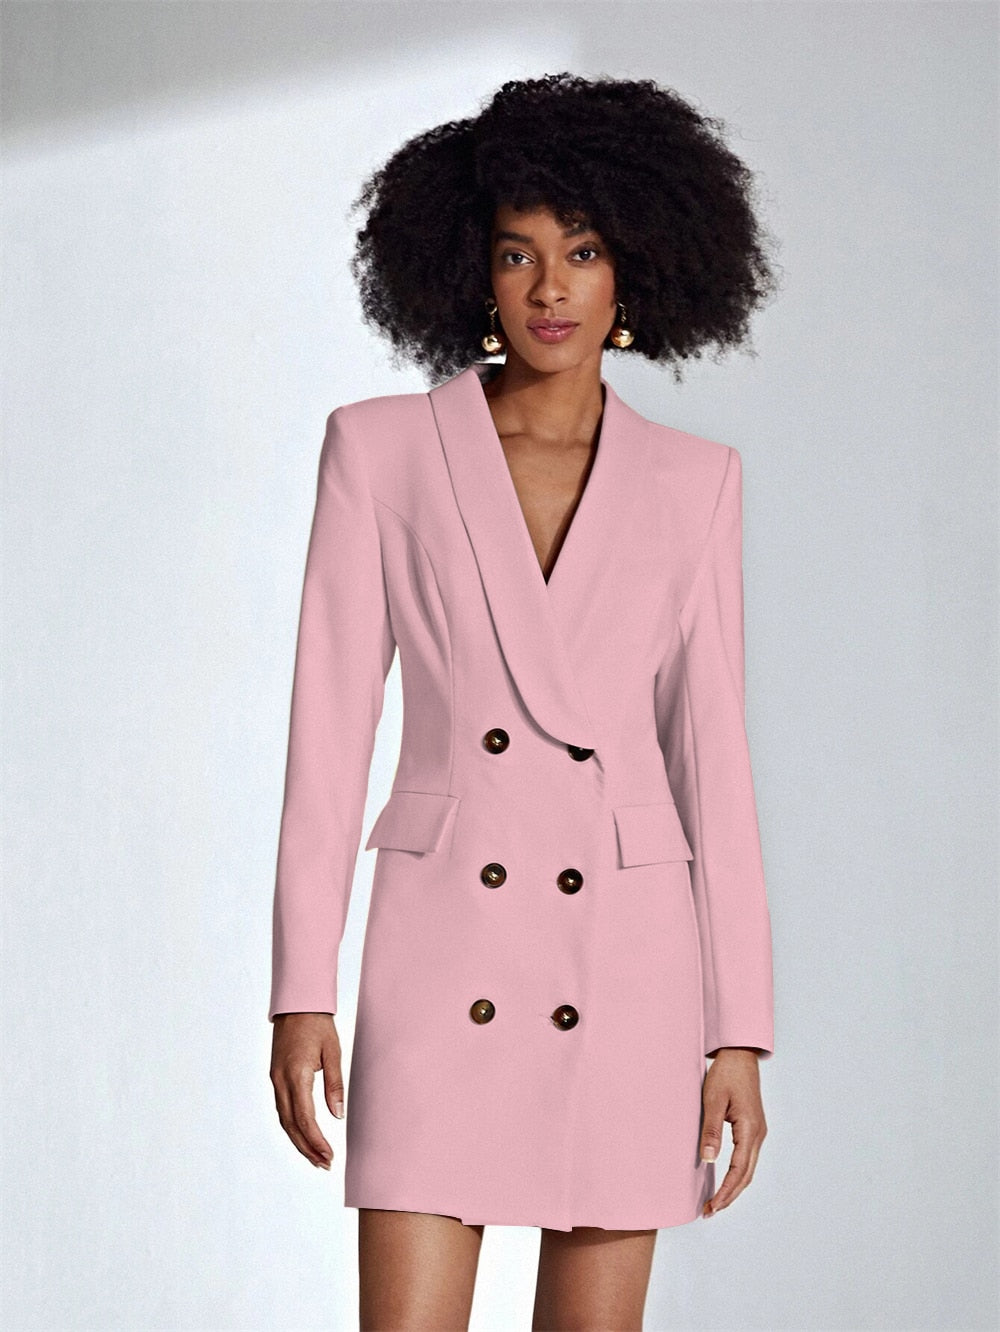 "Elegant Women's Double-Breasted Long Blazer: Lapel Coat for Fashionable Dressy Occasions, Proms, and Parties